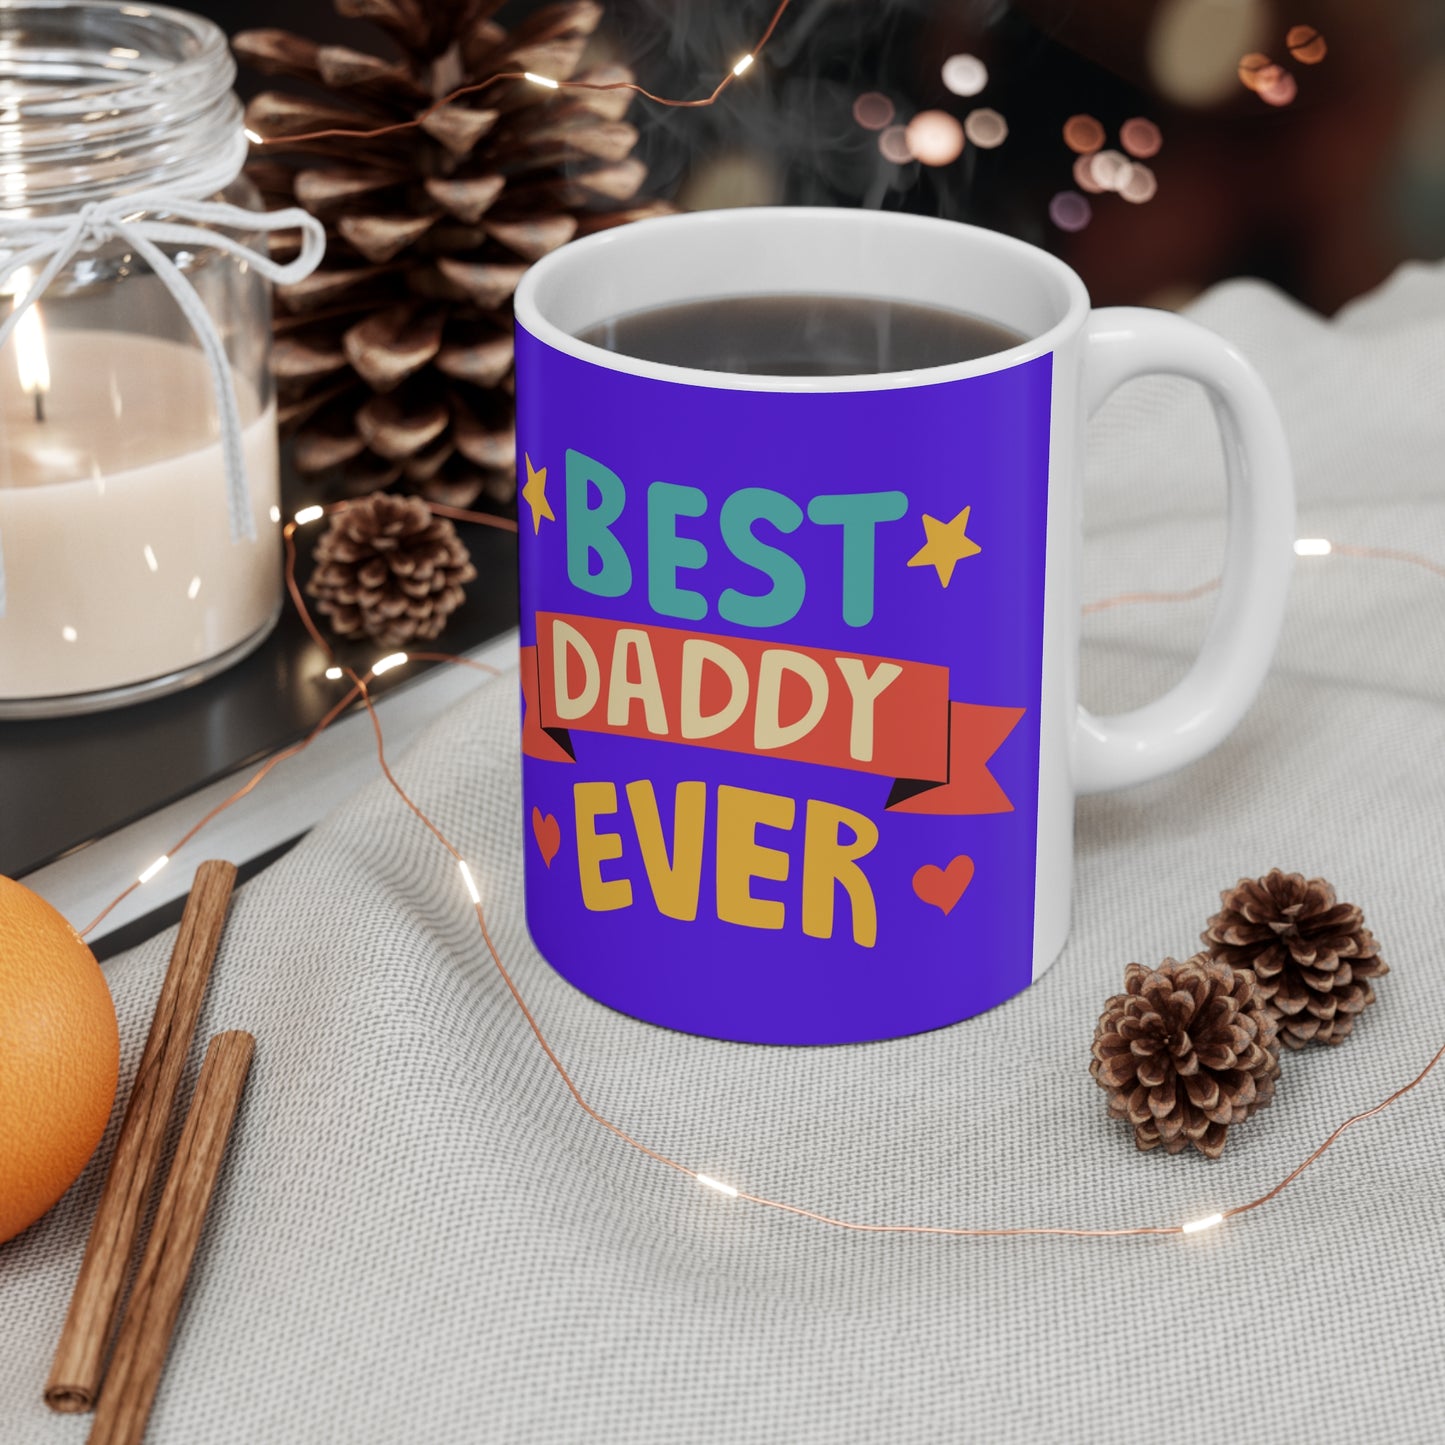 “BEST DADDY EVER” on one side and a dad teaching his child to ride a bike. Part of several mugs to choose from depending on what resonates with you.